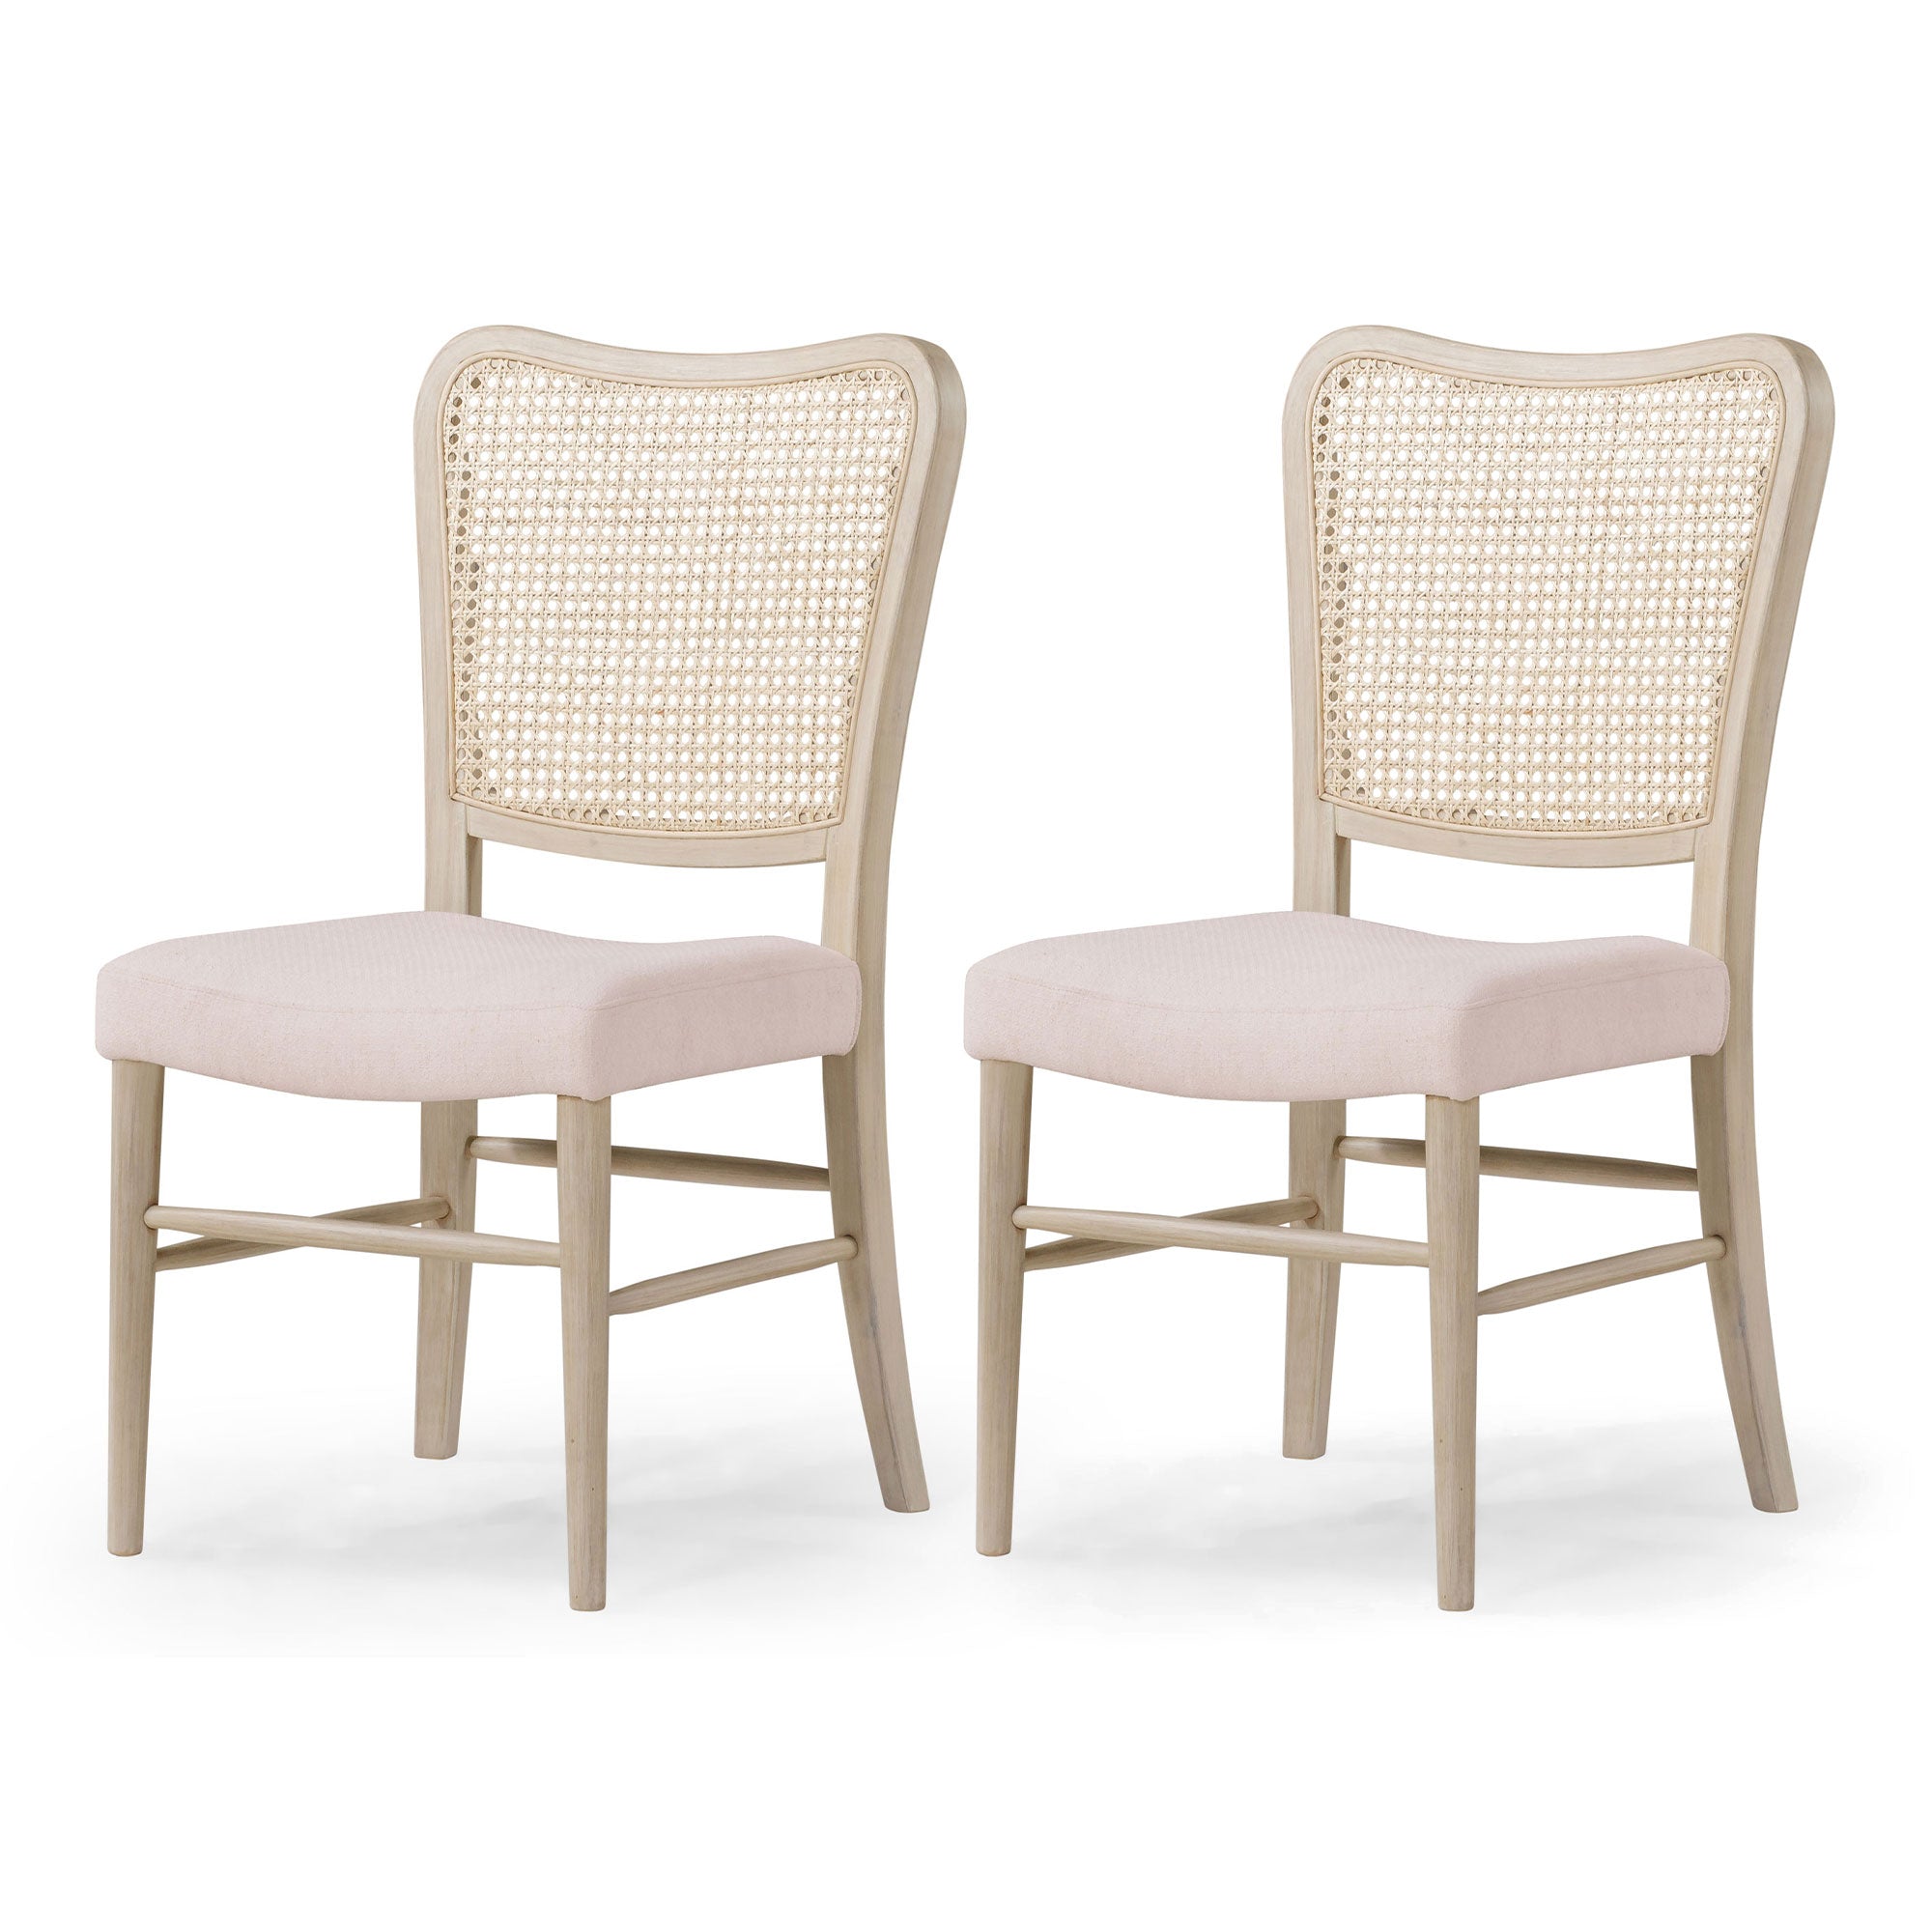 Maven-Lane-Vera-Wood-Dining-Chair,-Antique-White-&-Cream-Weave-Fabric,-Set-of-2-Kitchen-&-Dining-Room-Chairs